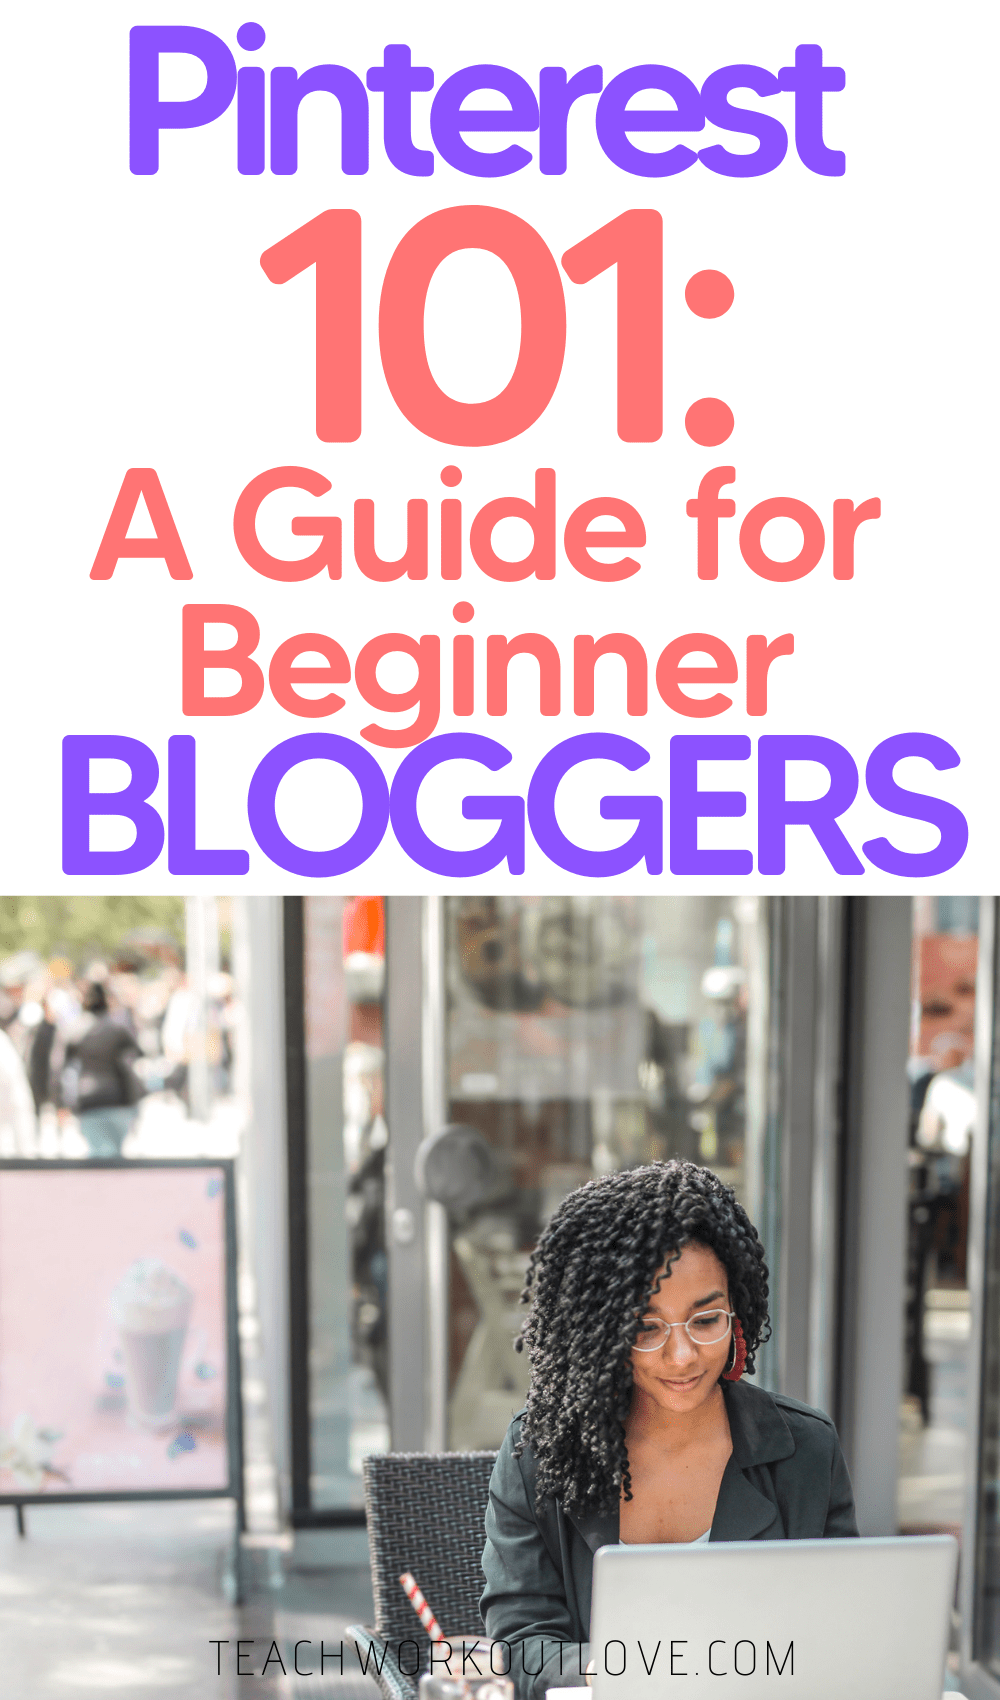 Not getting enough traffic to your blog? Learn how to use Pinterest for blogging and increase the number of readers of your site.